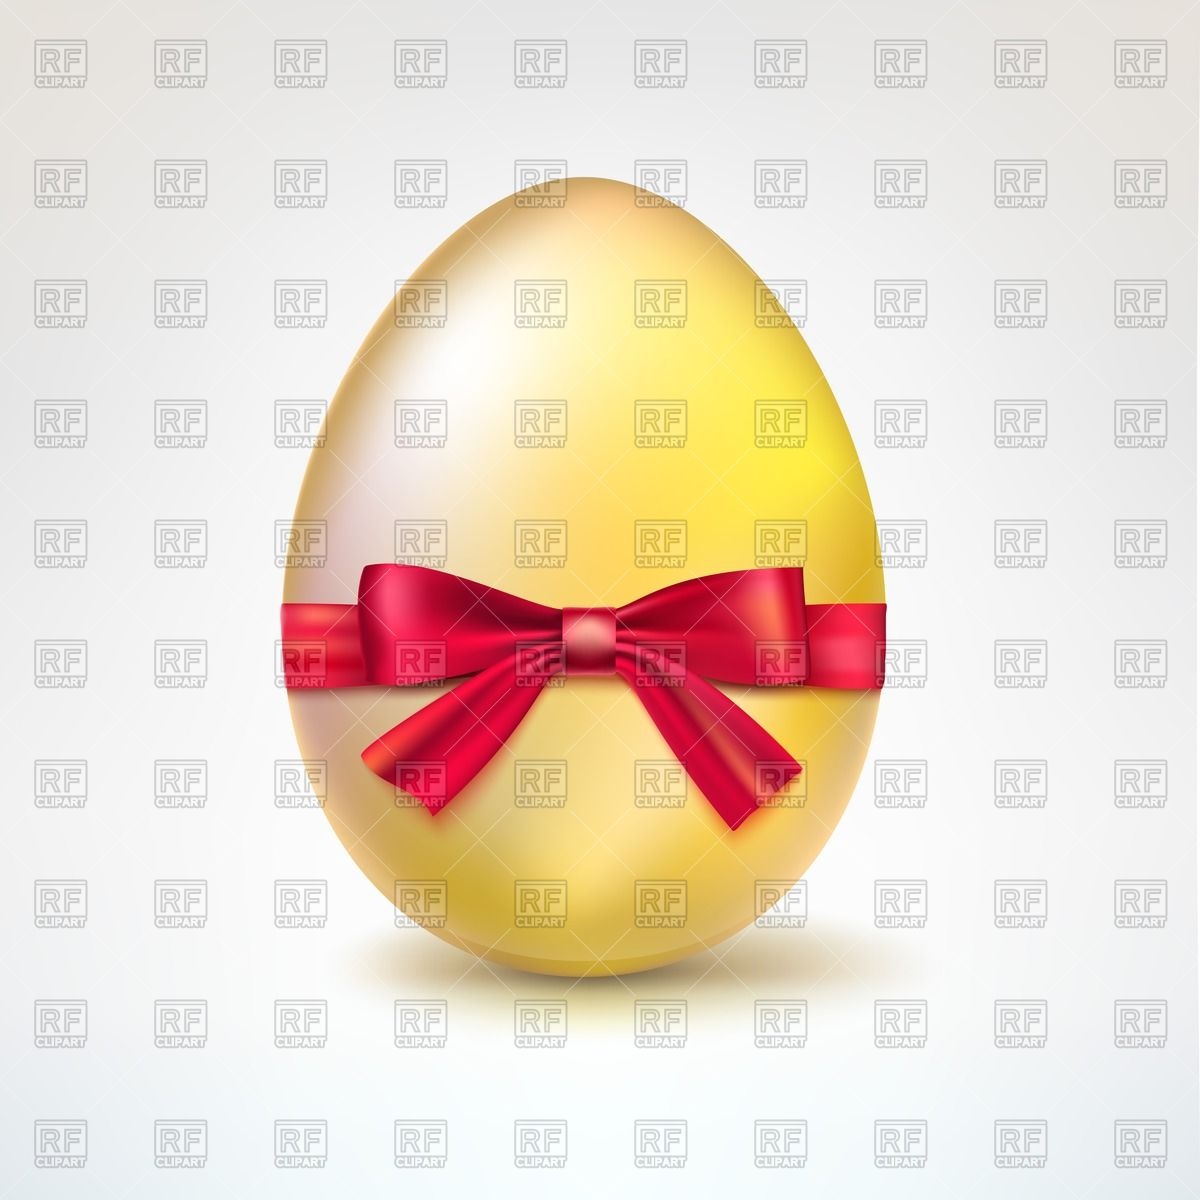 Golden Egg With Red Bow   Easter Symbol 42143 Download Royalty Free